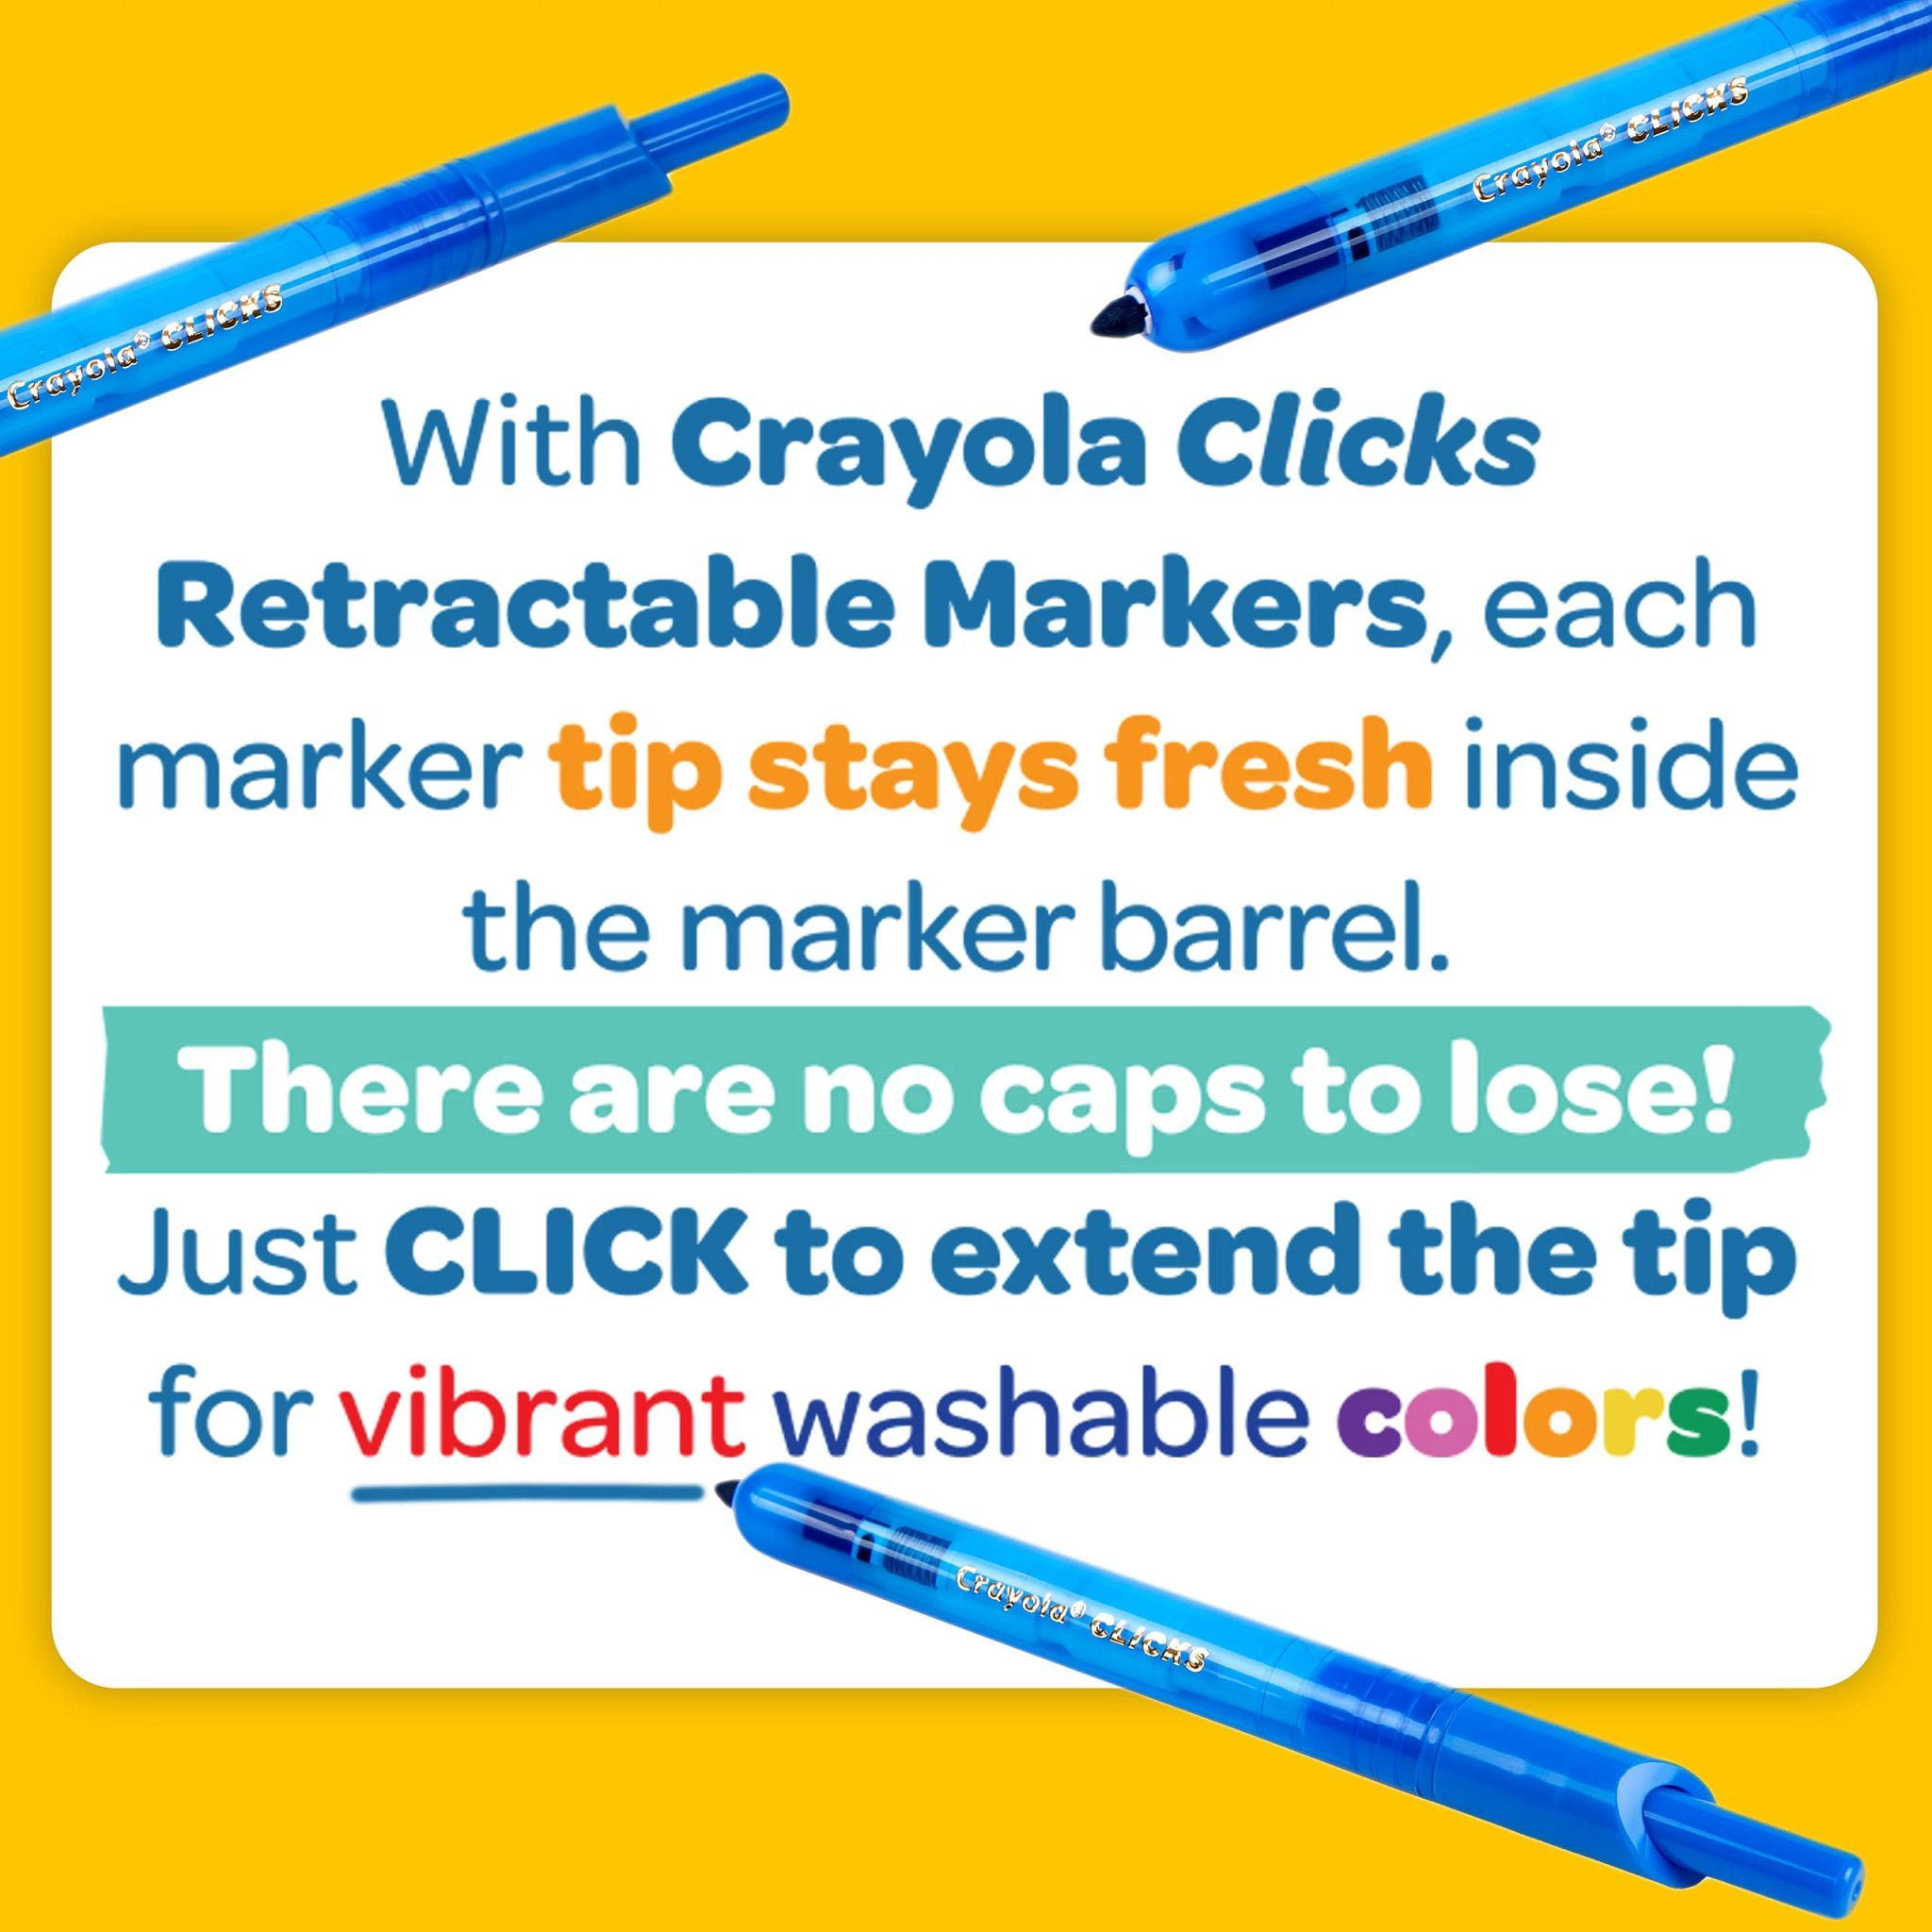 8 Packs: 10 ct. (80 total) Crayola® Clicks Retractable Markers